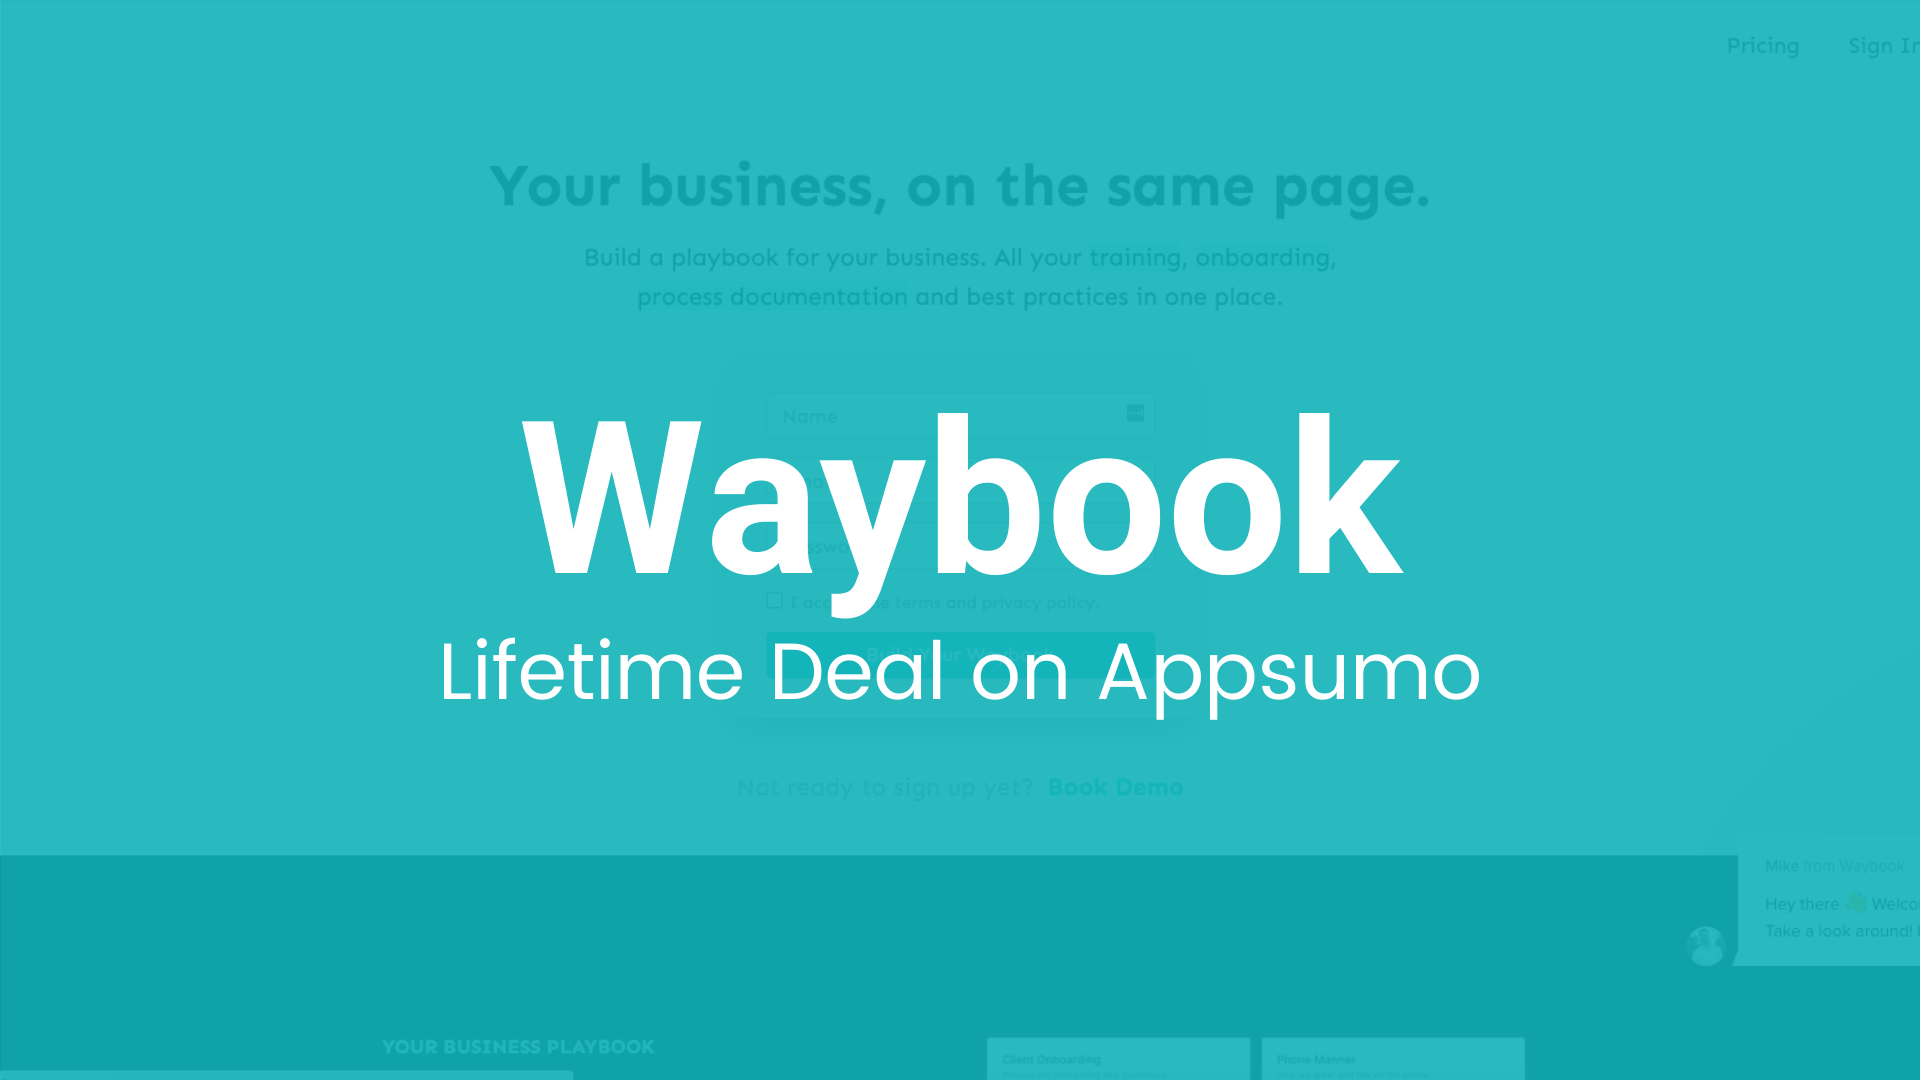 Waybook: The Perfect Playbook for Your Business